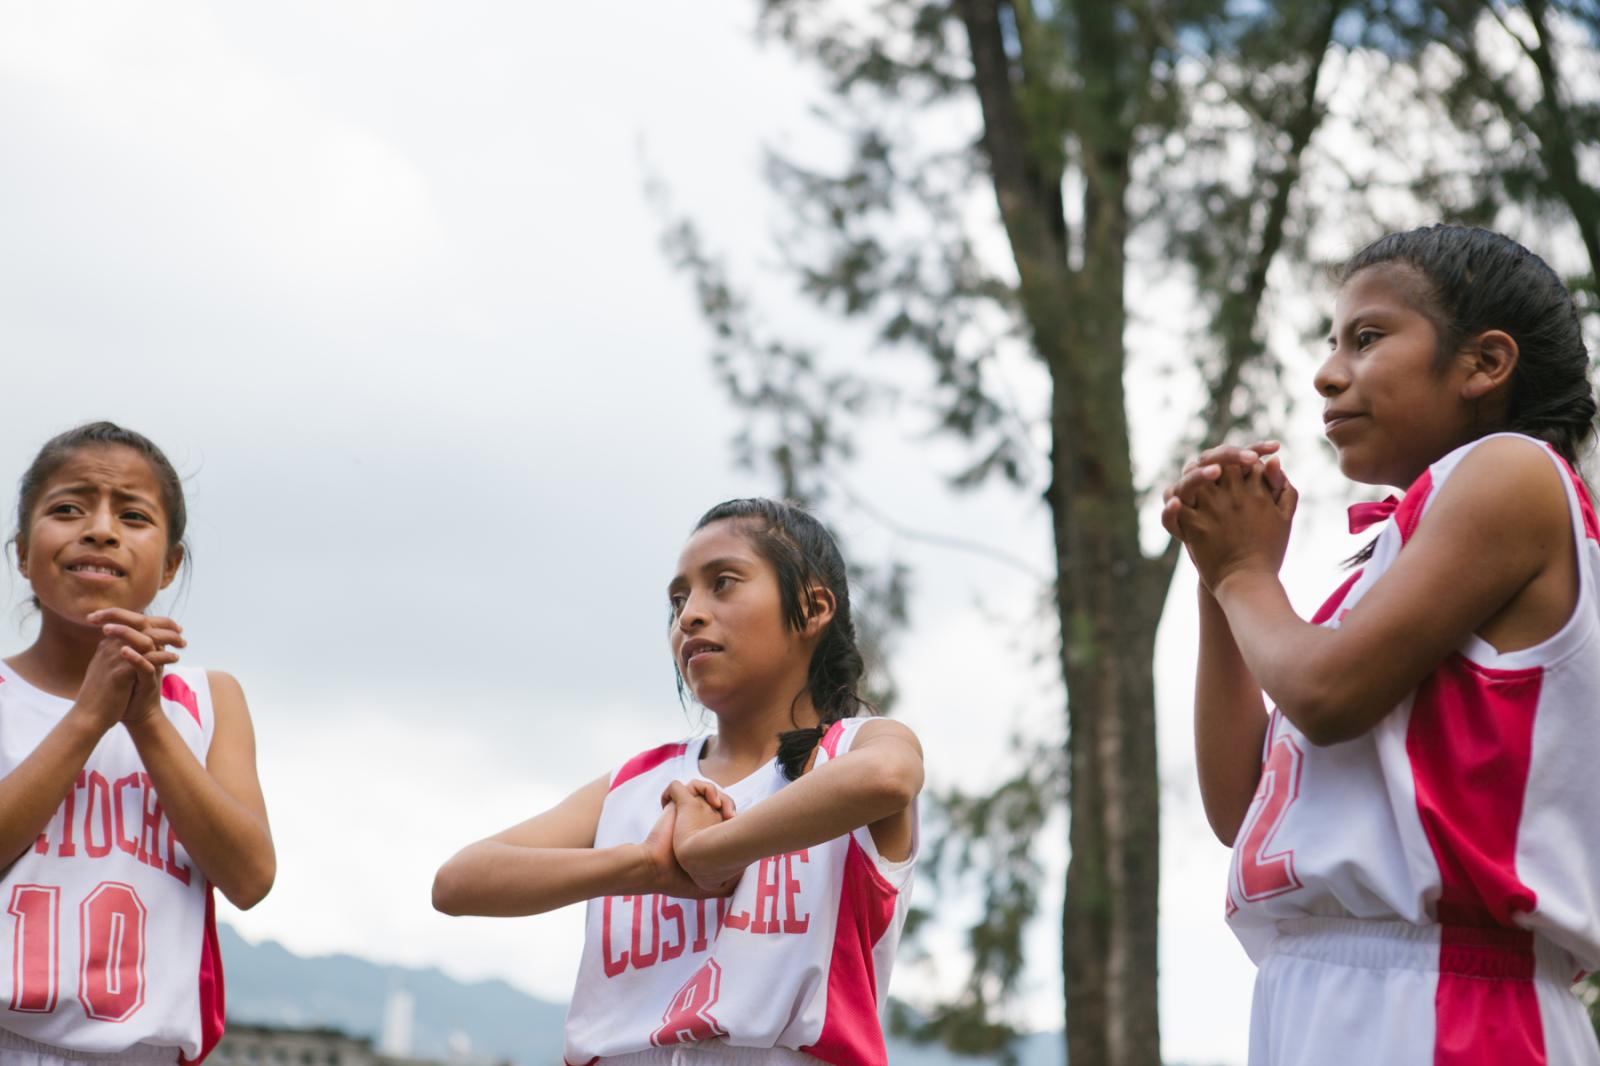 Image from Basketball in the Sierra Norte of Oaxaca - Basketball players of Team Costoche warm up before their...